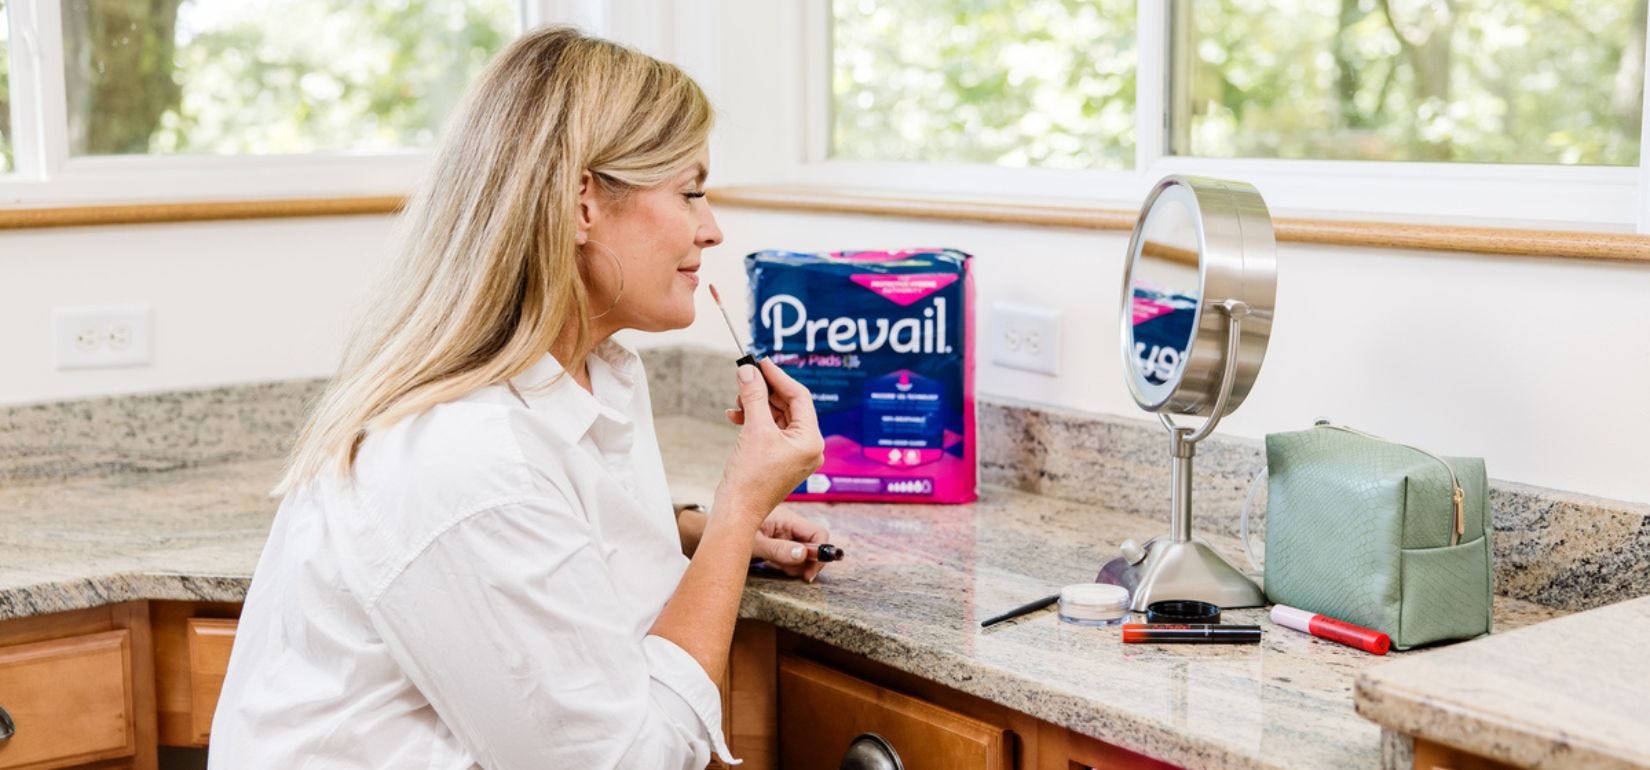 Prevail Med Prevail Disposable Incontinence Pull Up Underwear for